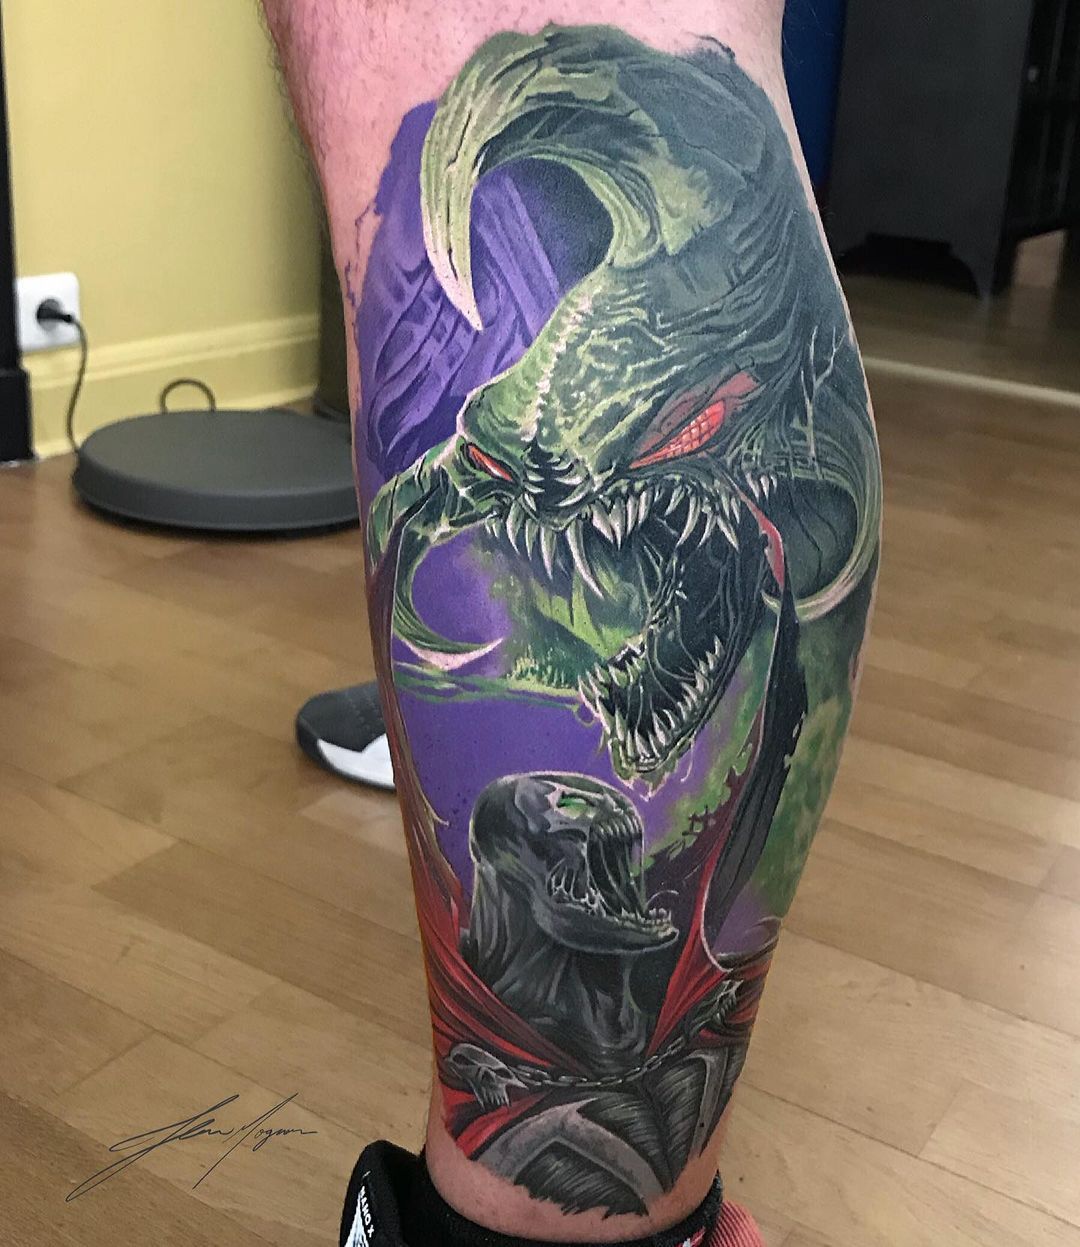 Tattoo uploaded by Charlie Connell • Spawn by Audie Fulfer Jr. (Via IG -  audie_tattoos) #AudieFulfer #realism #spawn #comics • Tattoodo